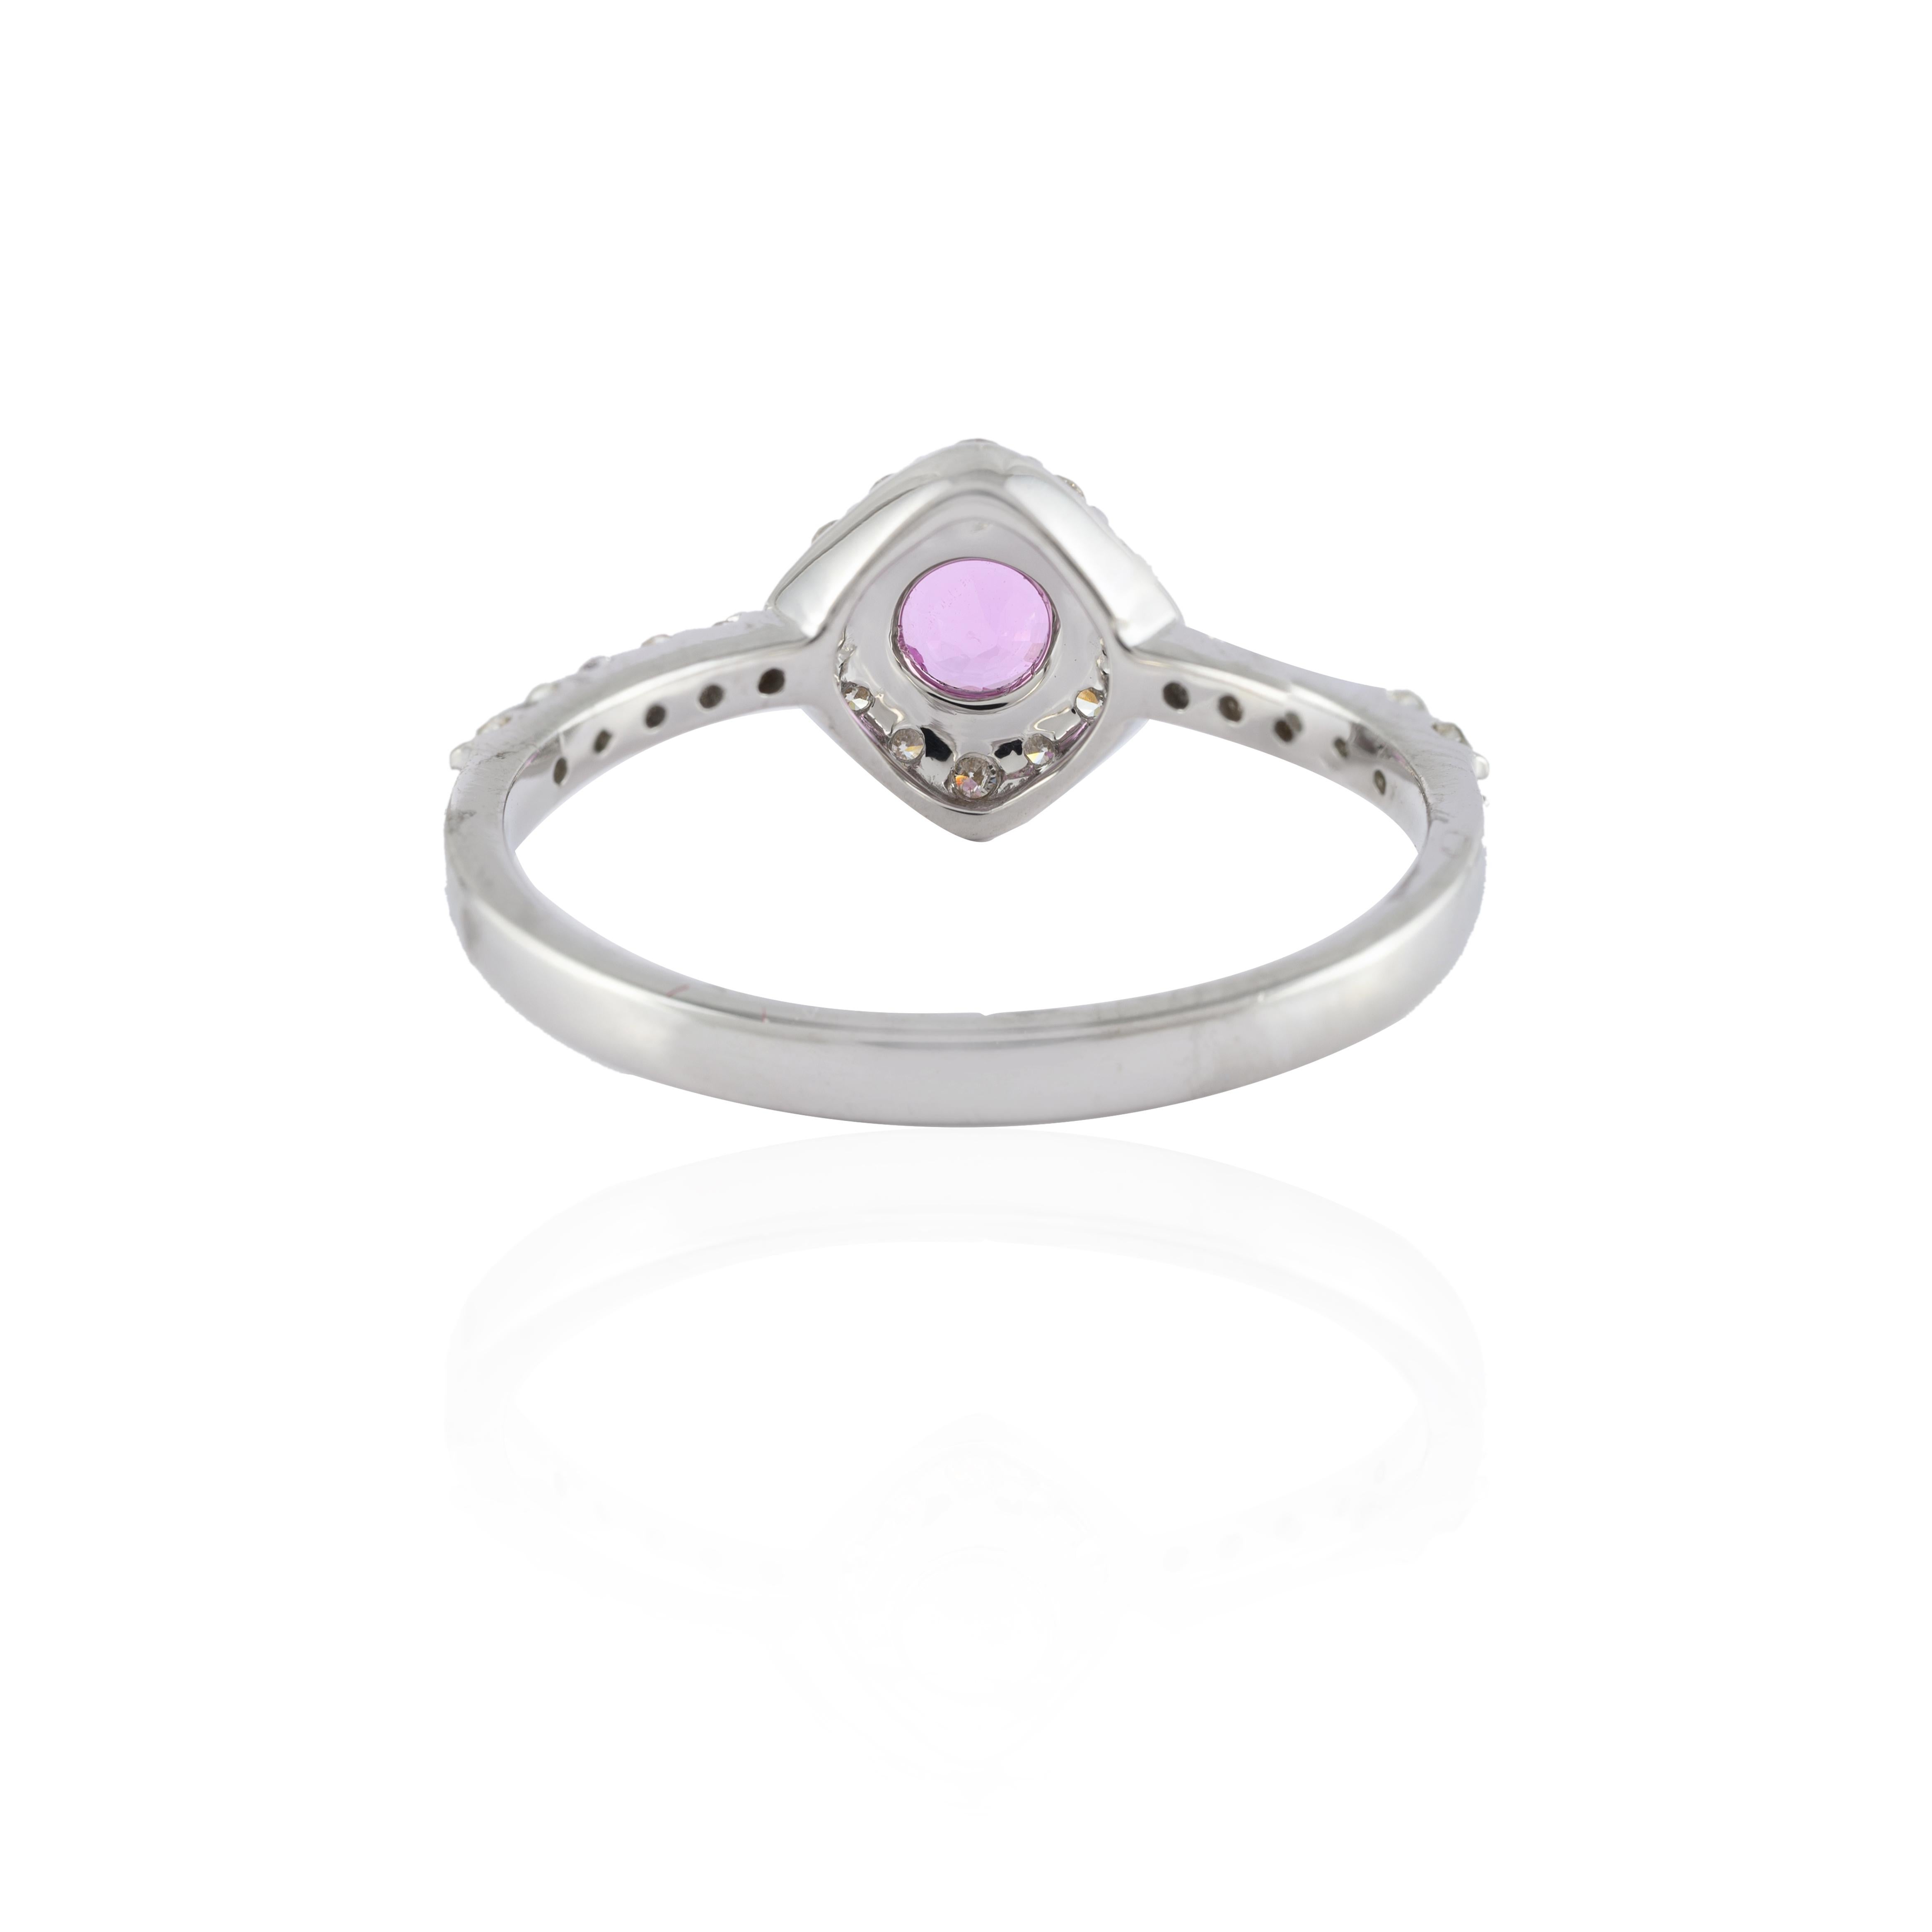 For Sale:  Minimal Halo Diamond and Pink Sapphire Ring Studded in 14k Solid White Gold 11